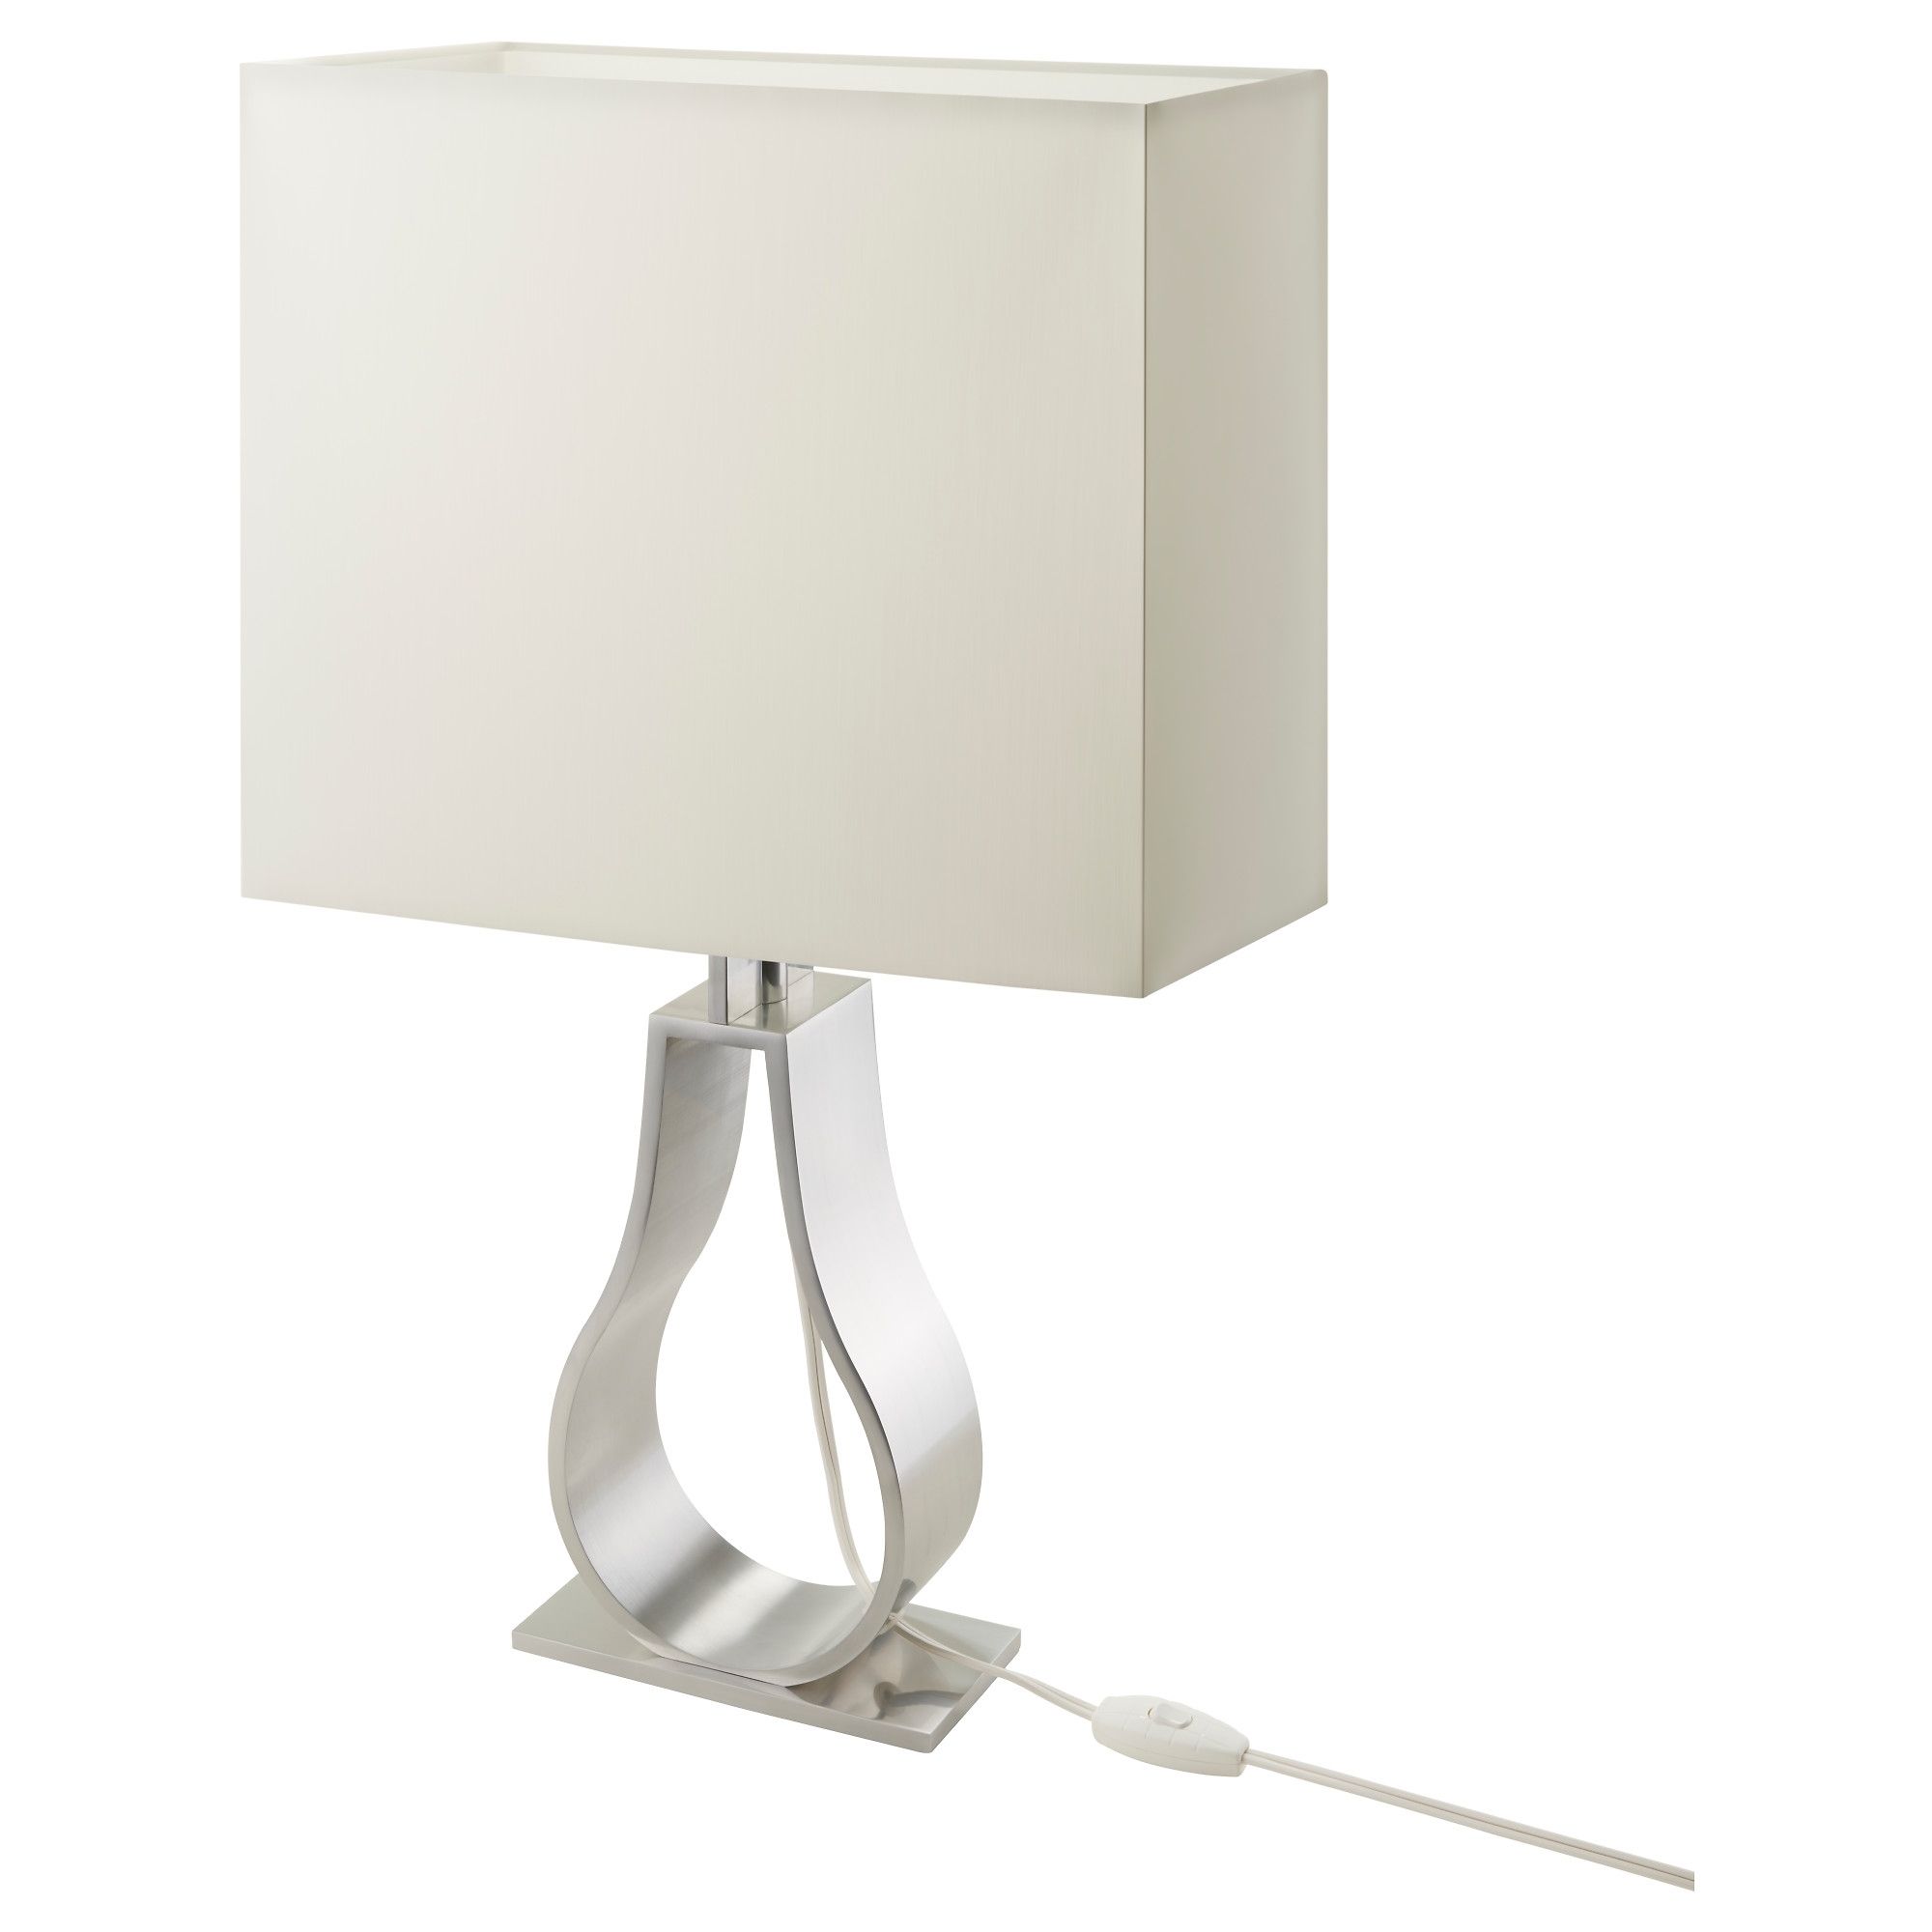 Top 66 Preeminent White Lights For Bedroom And Gold Table Lamp Within Ceramic Living Room Table Lamps (View 15 of 15)